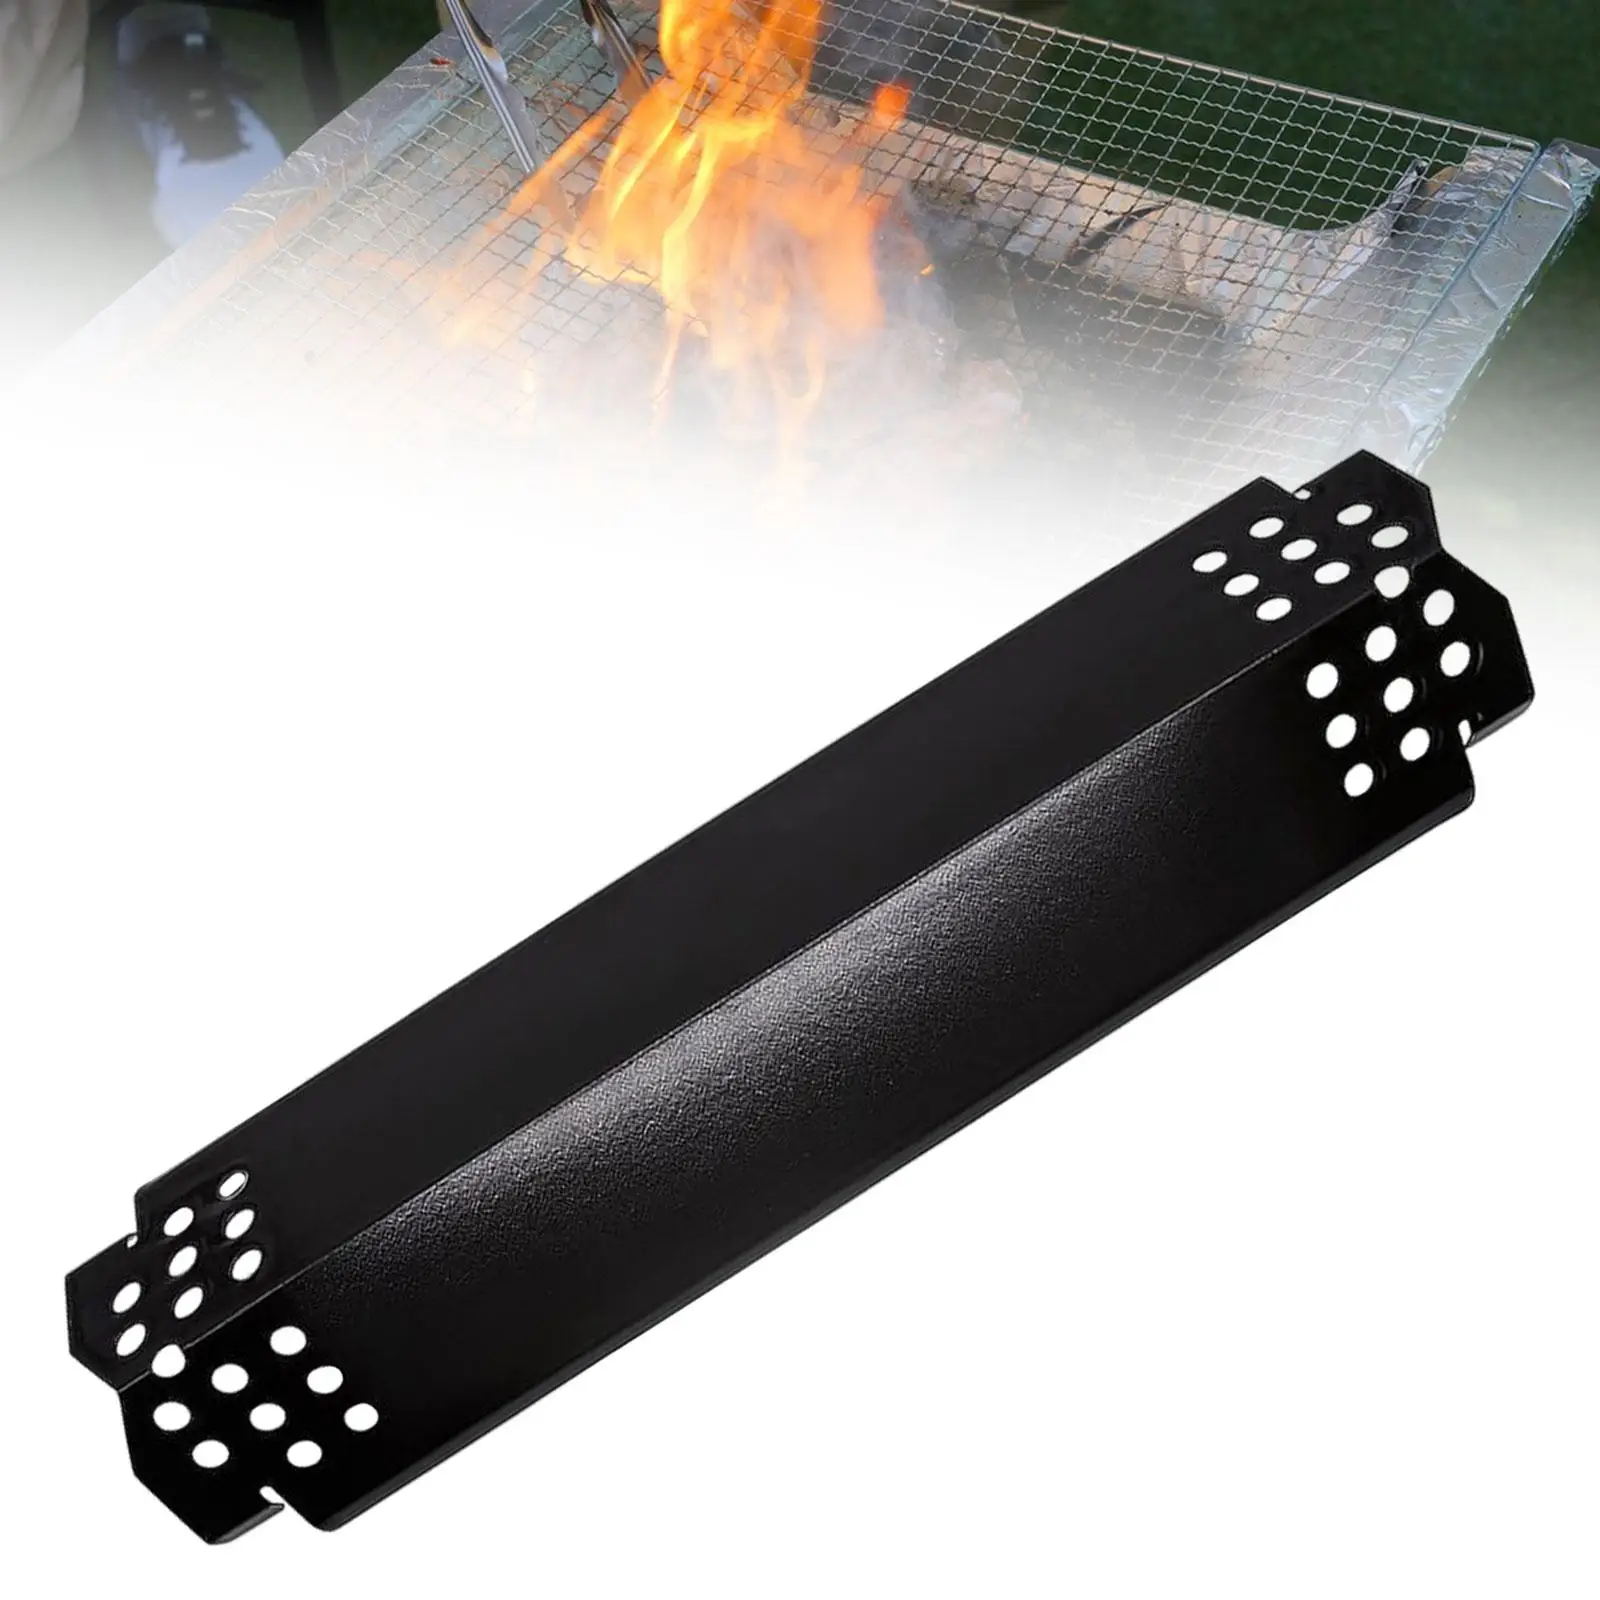 Heat Plate Replacement Heat Tent for BBQ Grillware Gas Grill Backyard